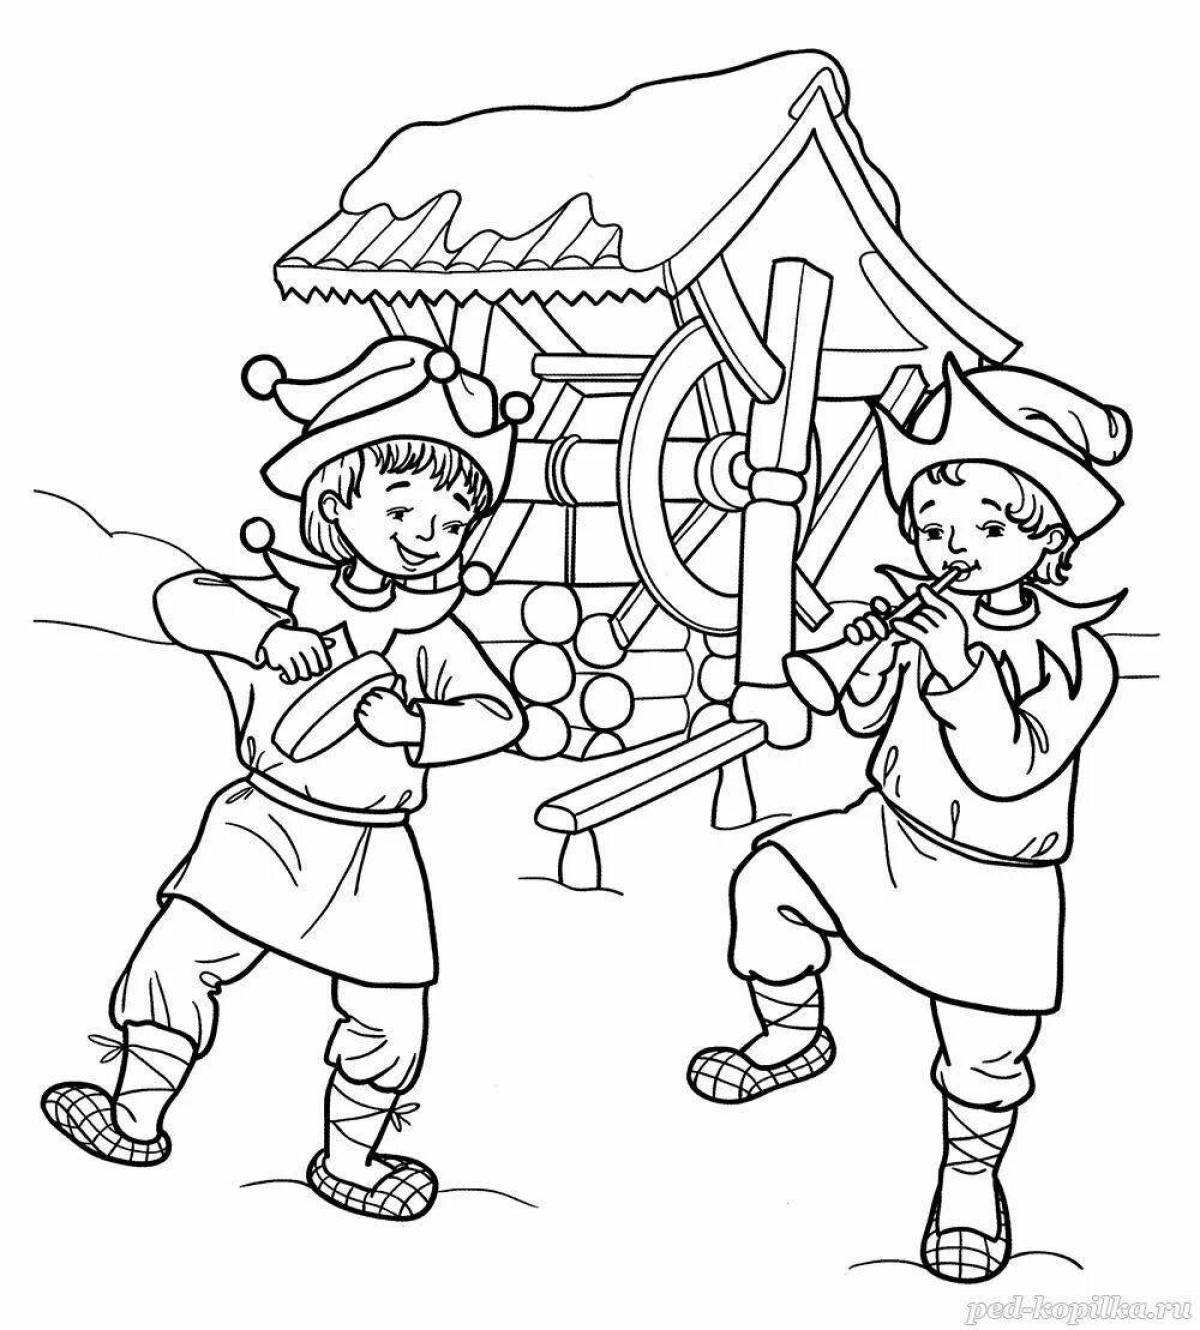 Funny jester coloring book for kids